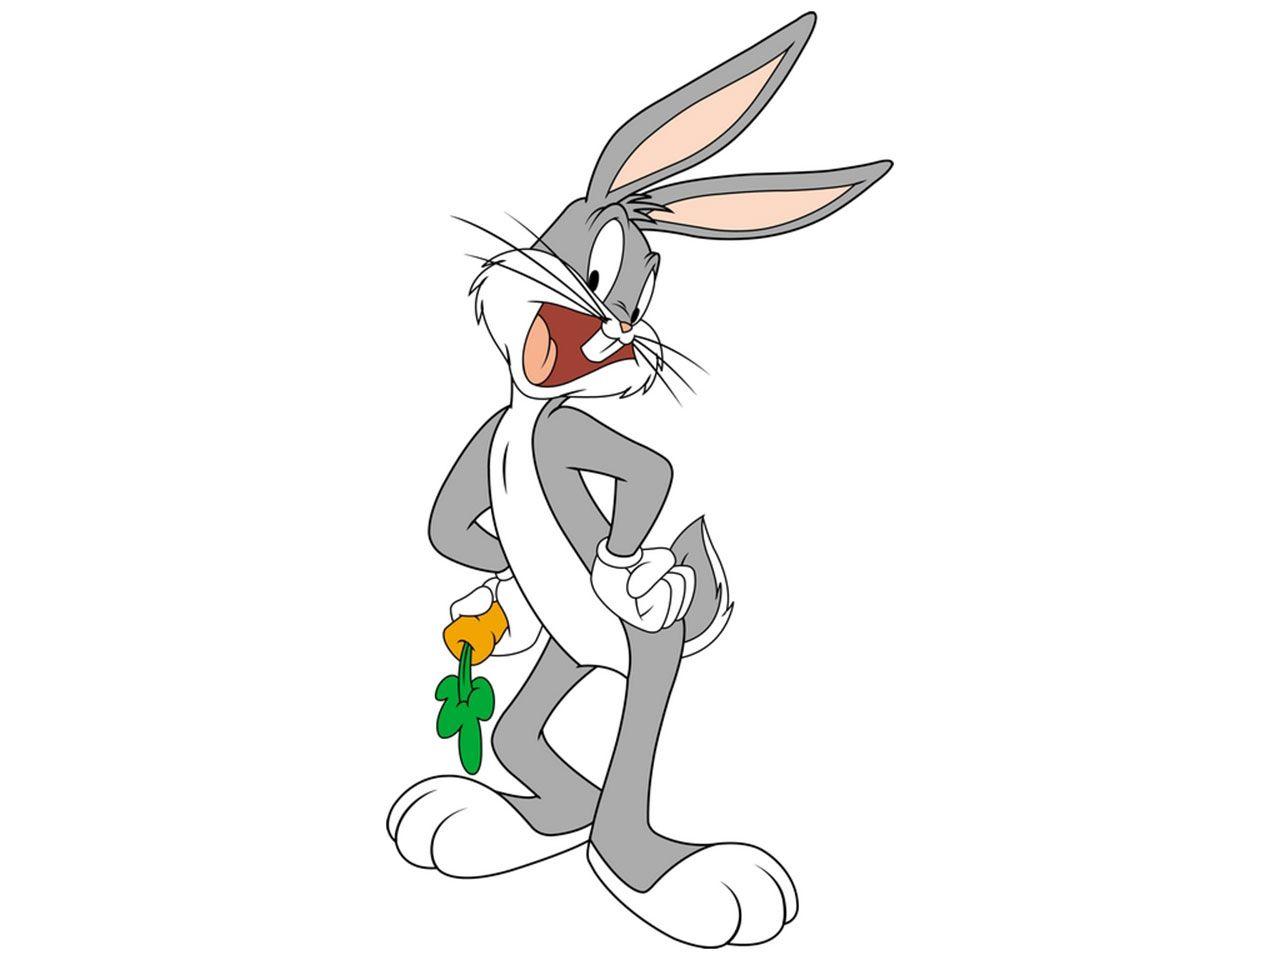 Free Wallpapers Bugs Bunny Wallpapers 1280x960PX ~ Wallpapers Bugs